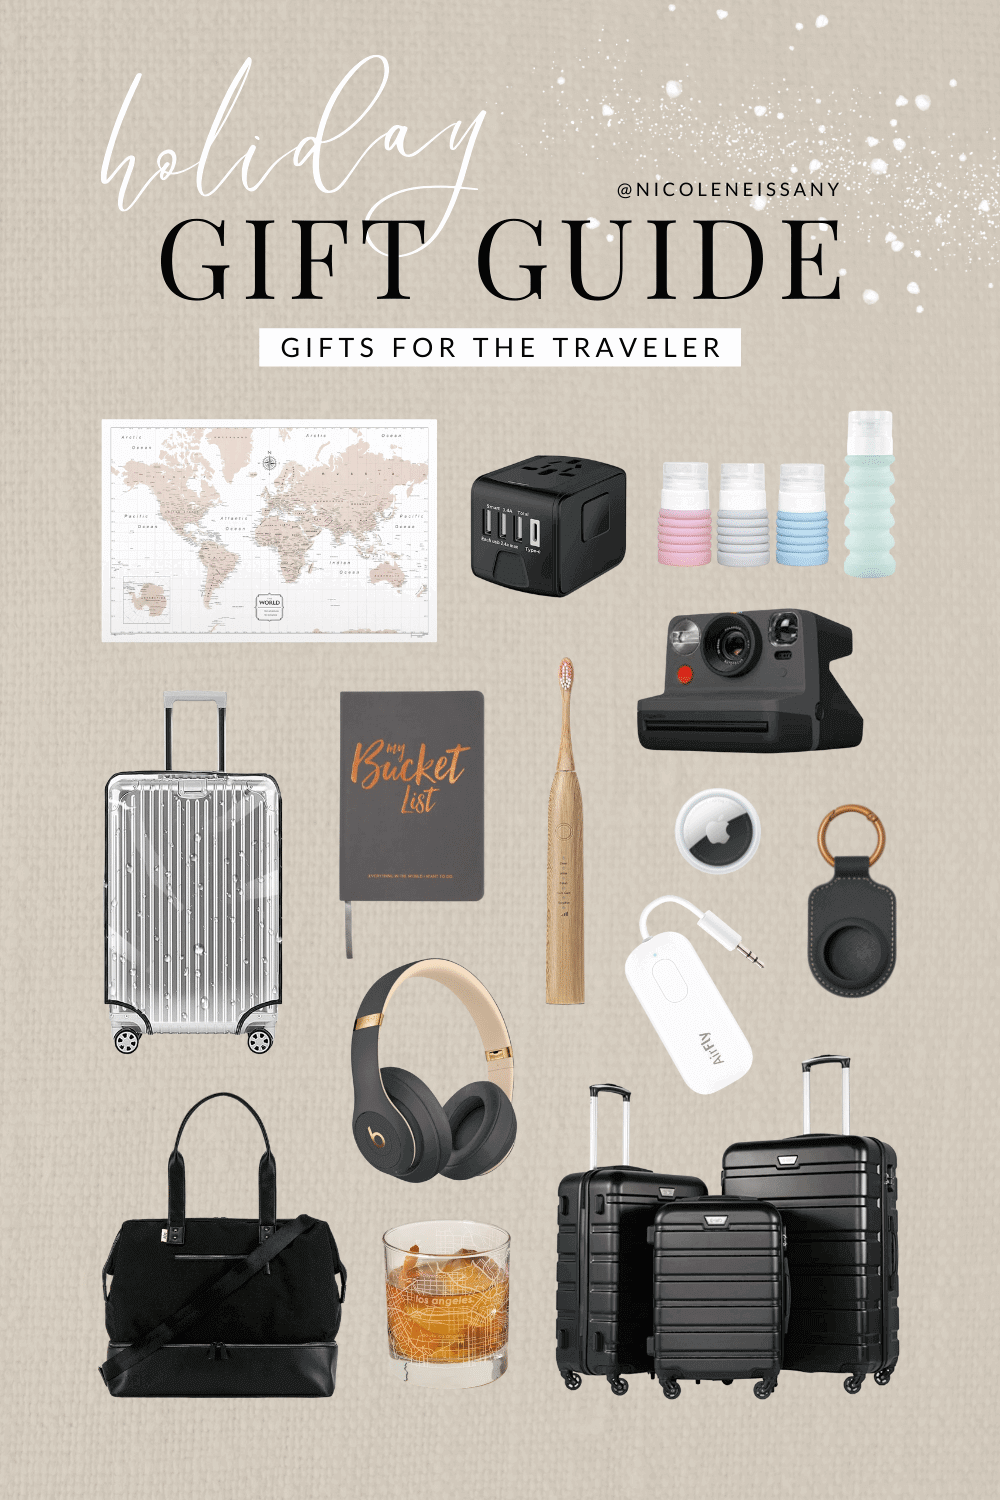 Wagner Holiday Gift Guide